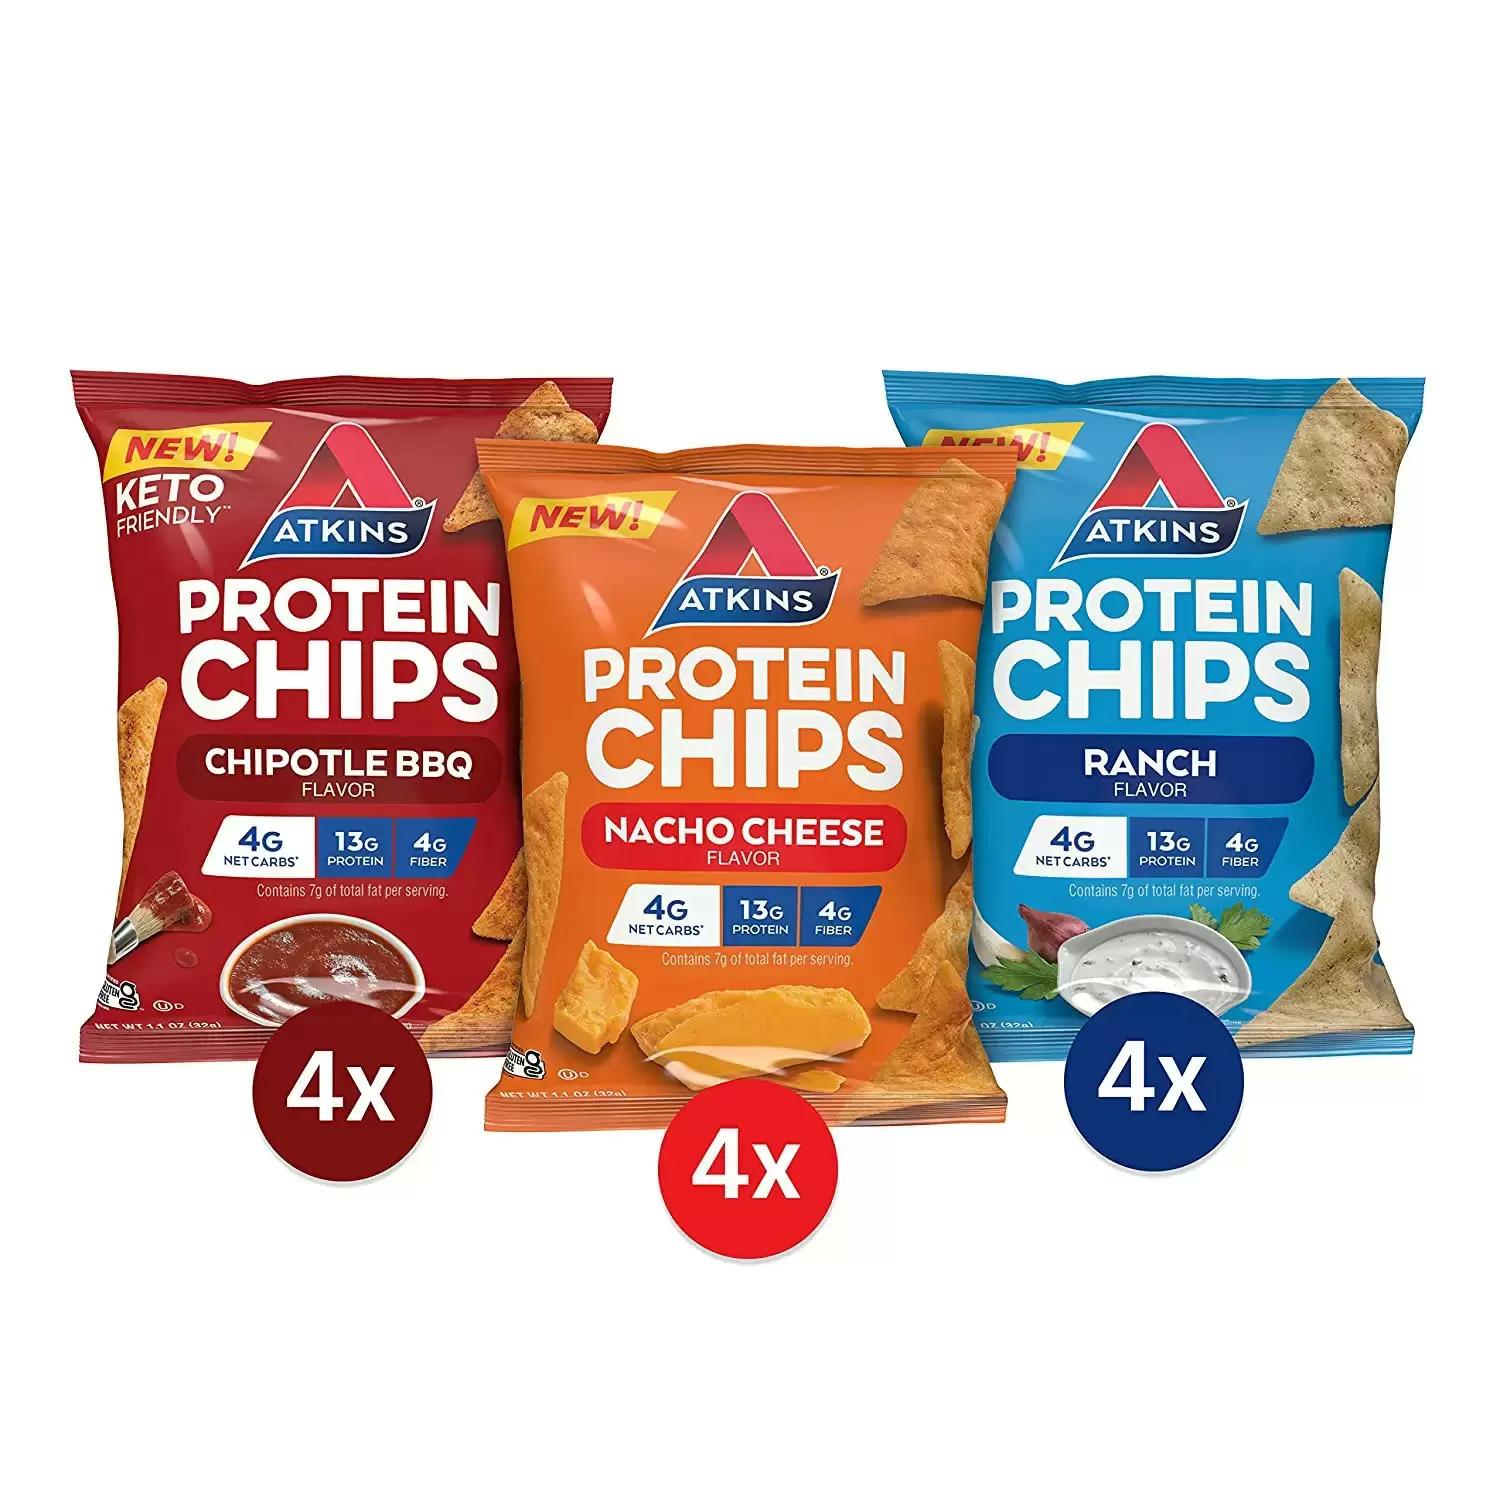 Atkins Keto Friendly Protein Chips 12 Count for $13 Shipped